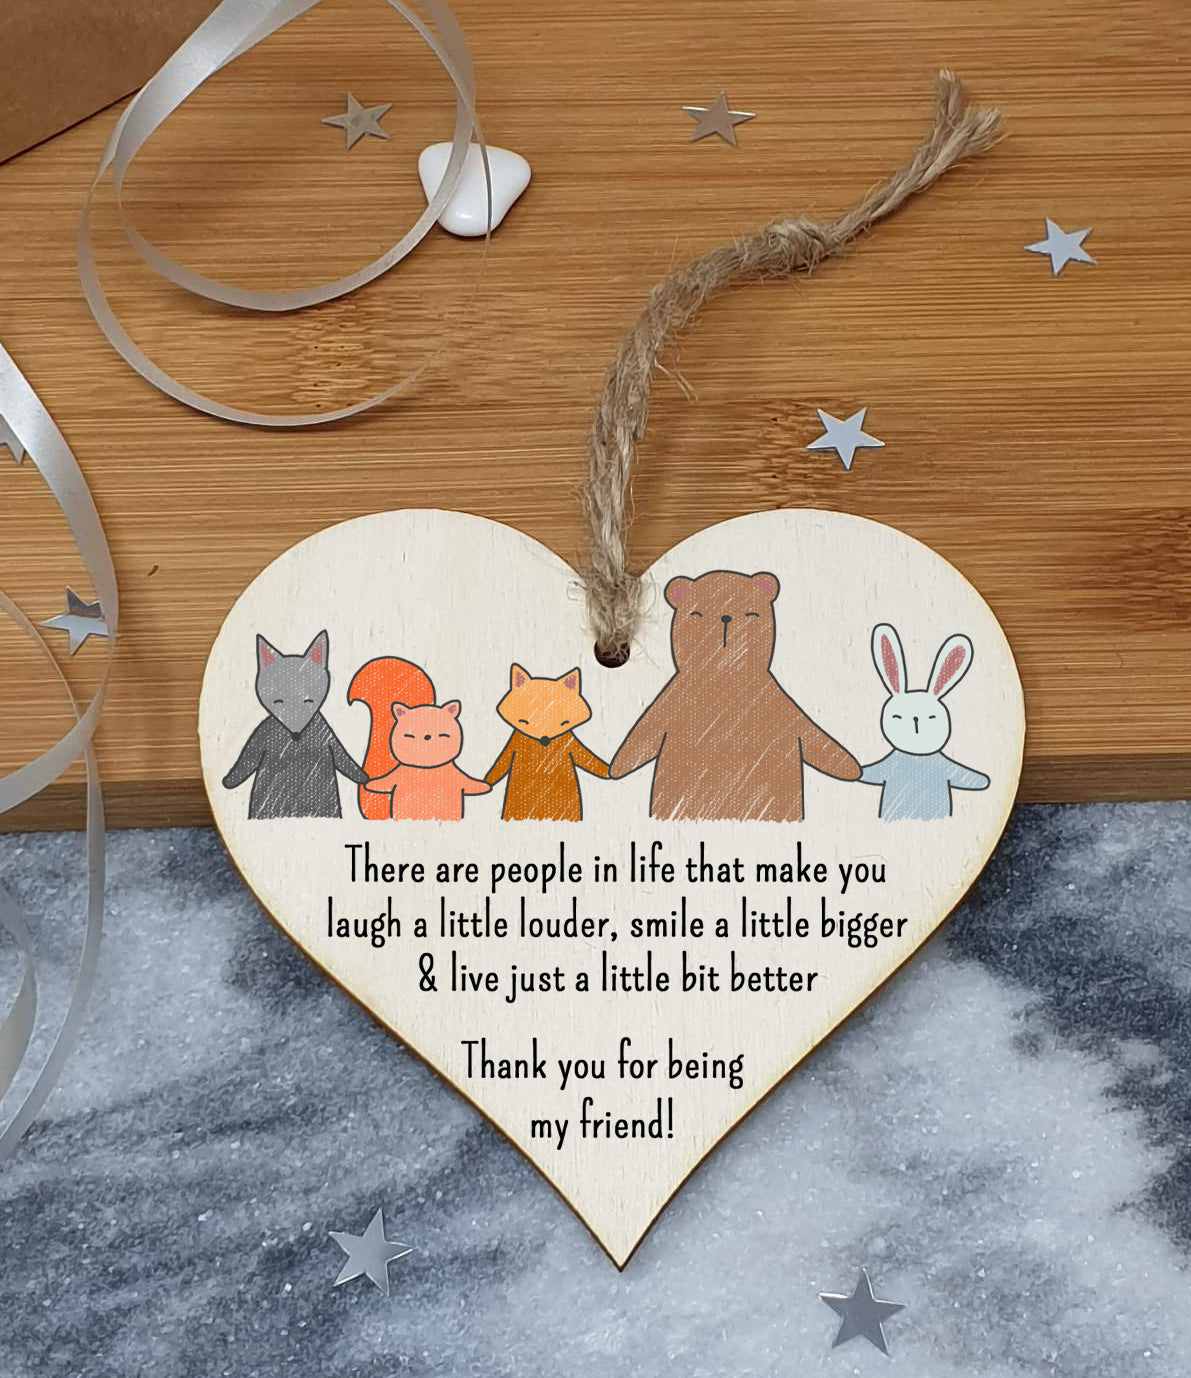 Handmade Wooden Hanging Heart Plaque Gift There are people that make life better Thank you for being my friend cute wall window hanger for best friends absent friend Miss You hand drawn design